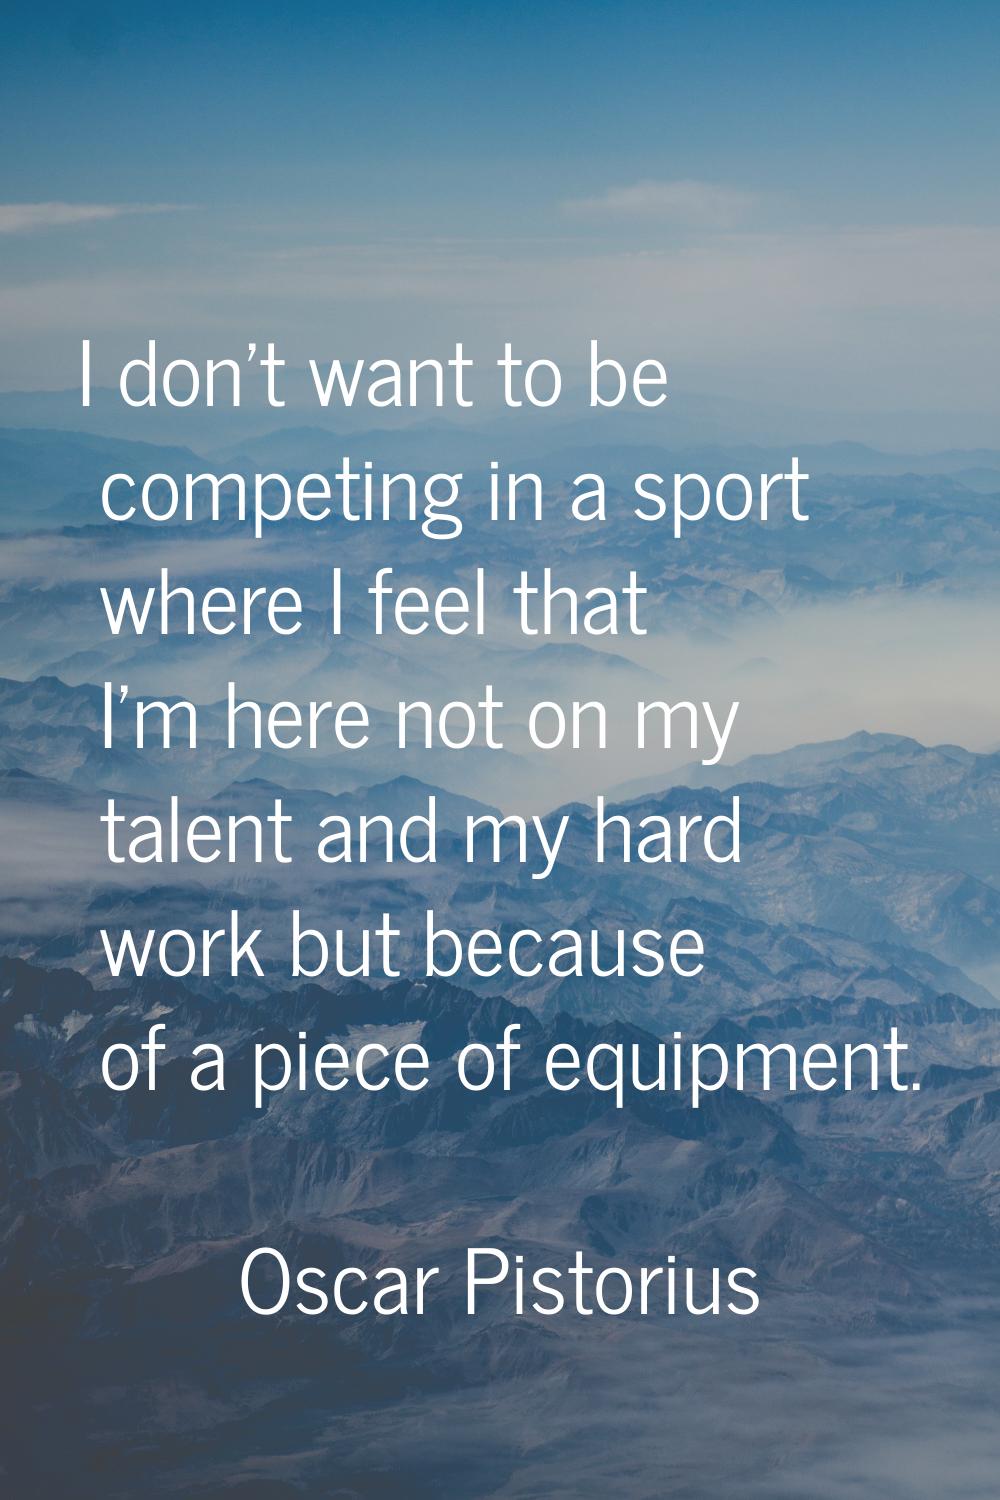 I don't want to be competing in a sport where I feel that I'm here not on my talent and my hard wor